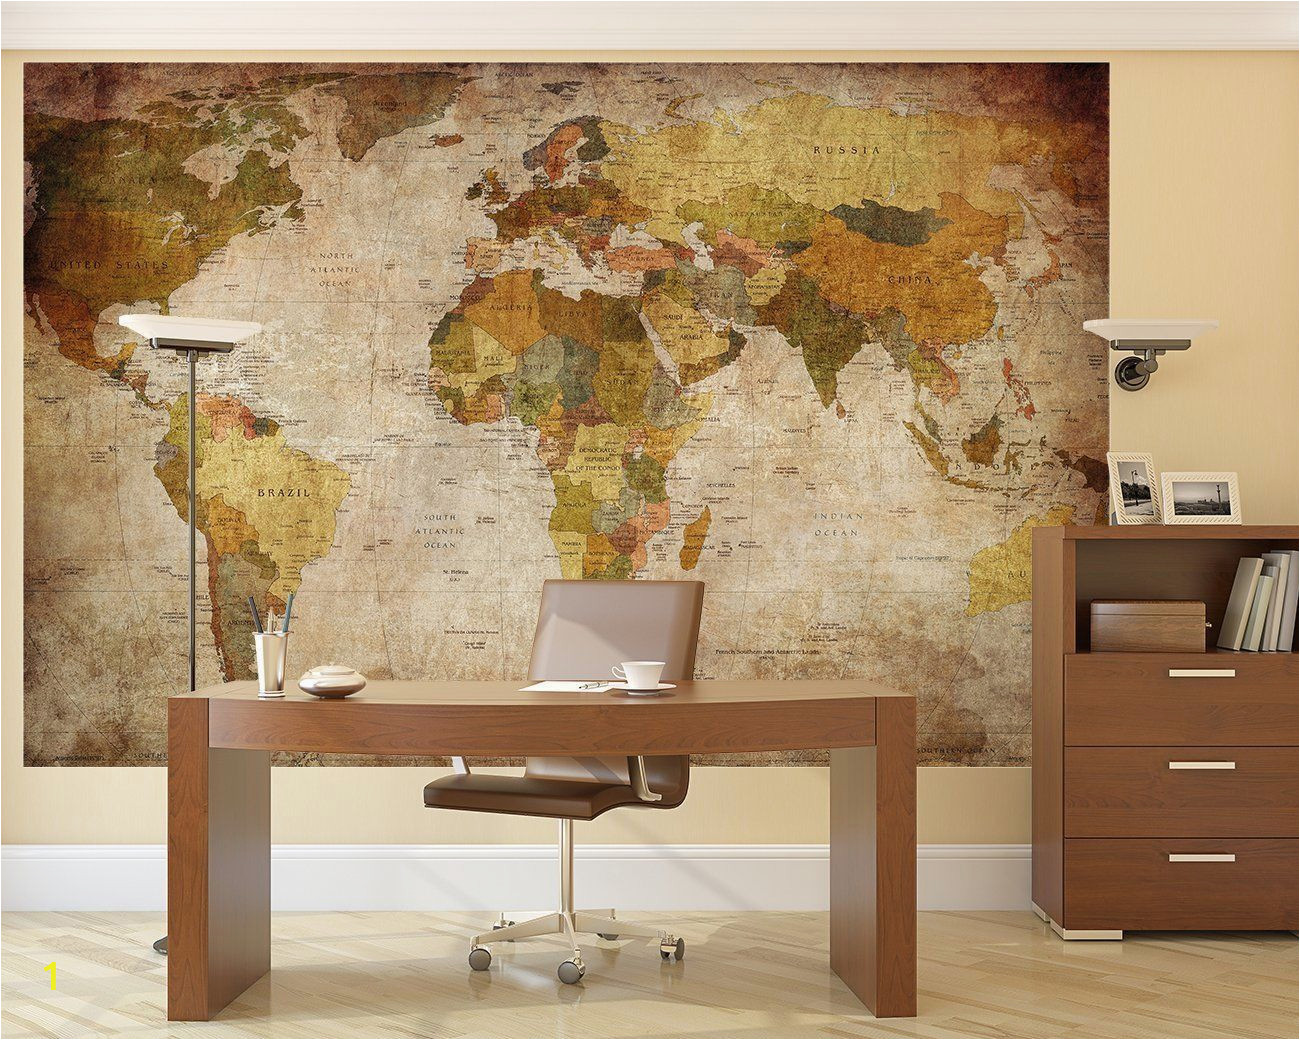 Antique Map Wall Mural Details About Vintage World Map Wallpaper Mural Giant